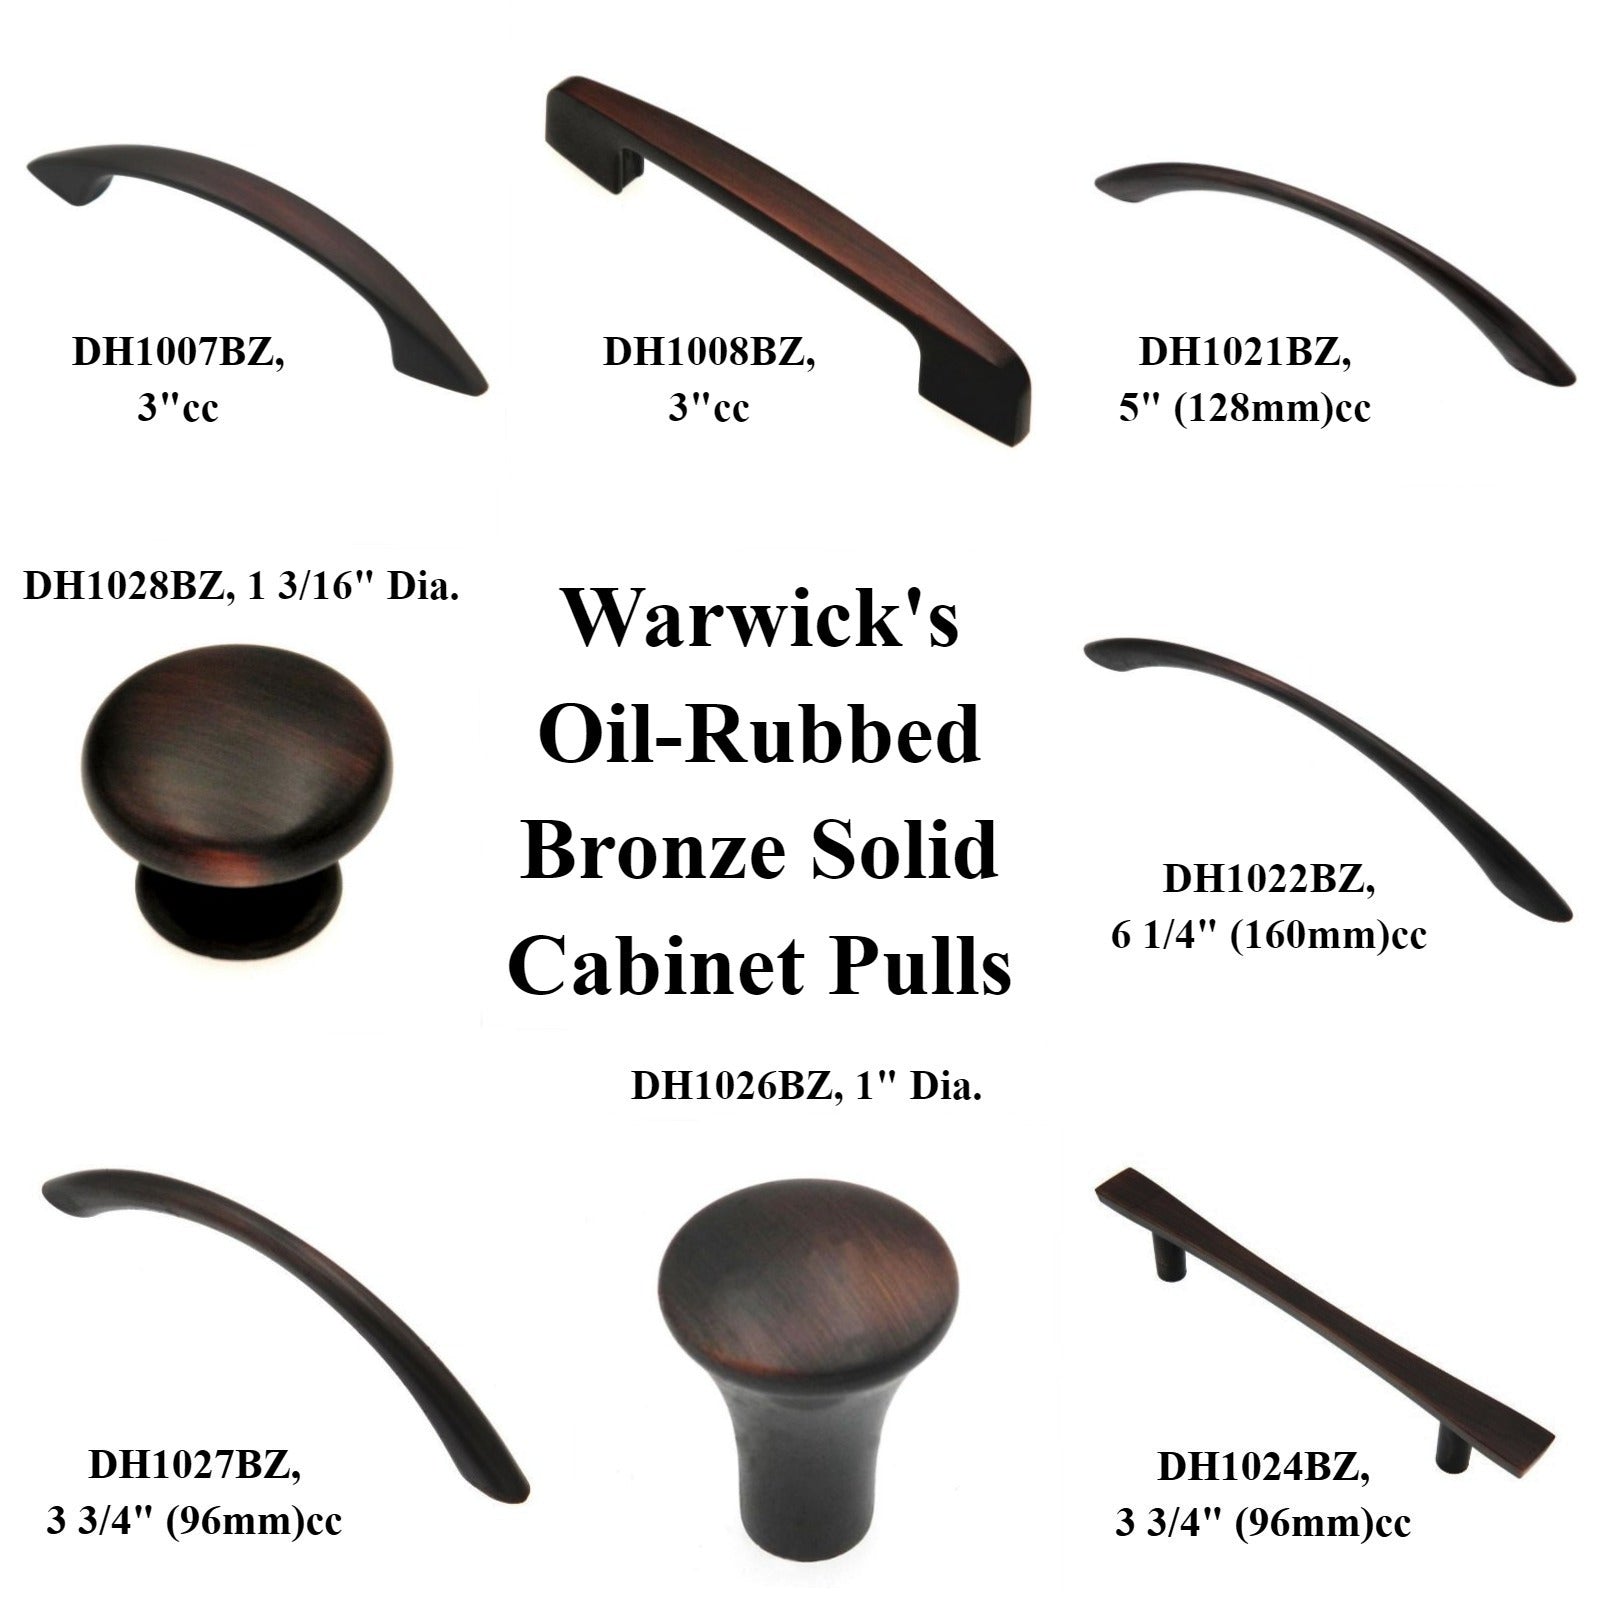 Warwick Contemporary Oil-Rubbed Bronze 3"cc Solid Cabinet Handle Pull DH1007BZ